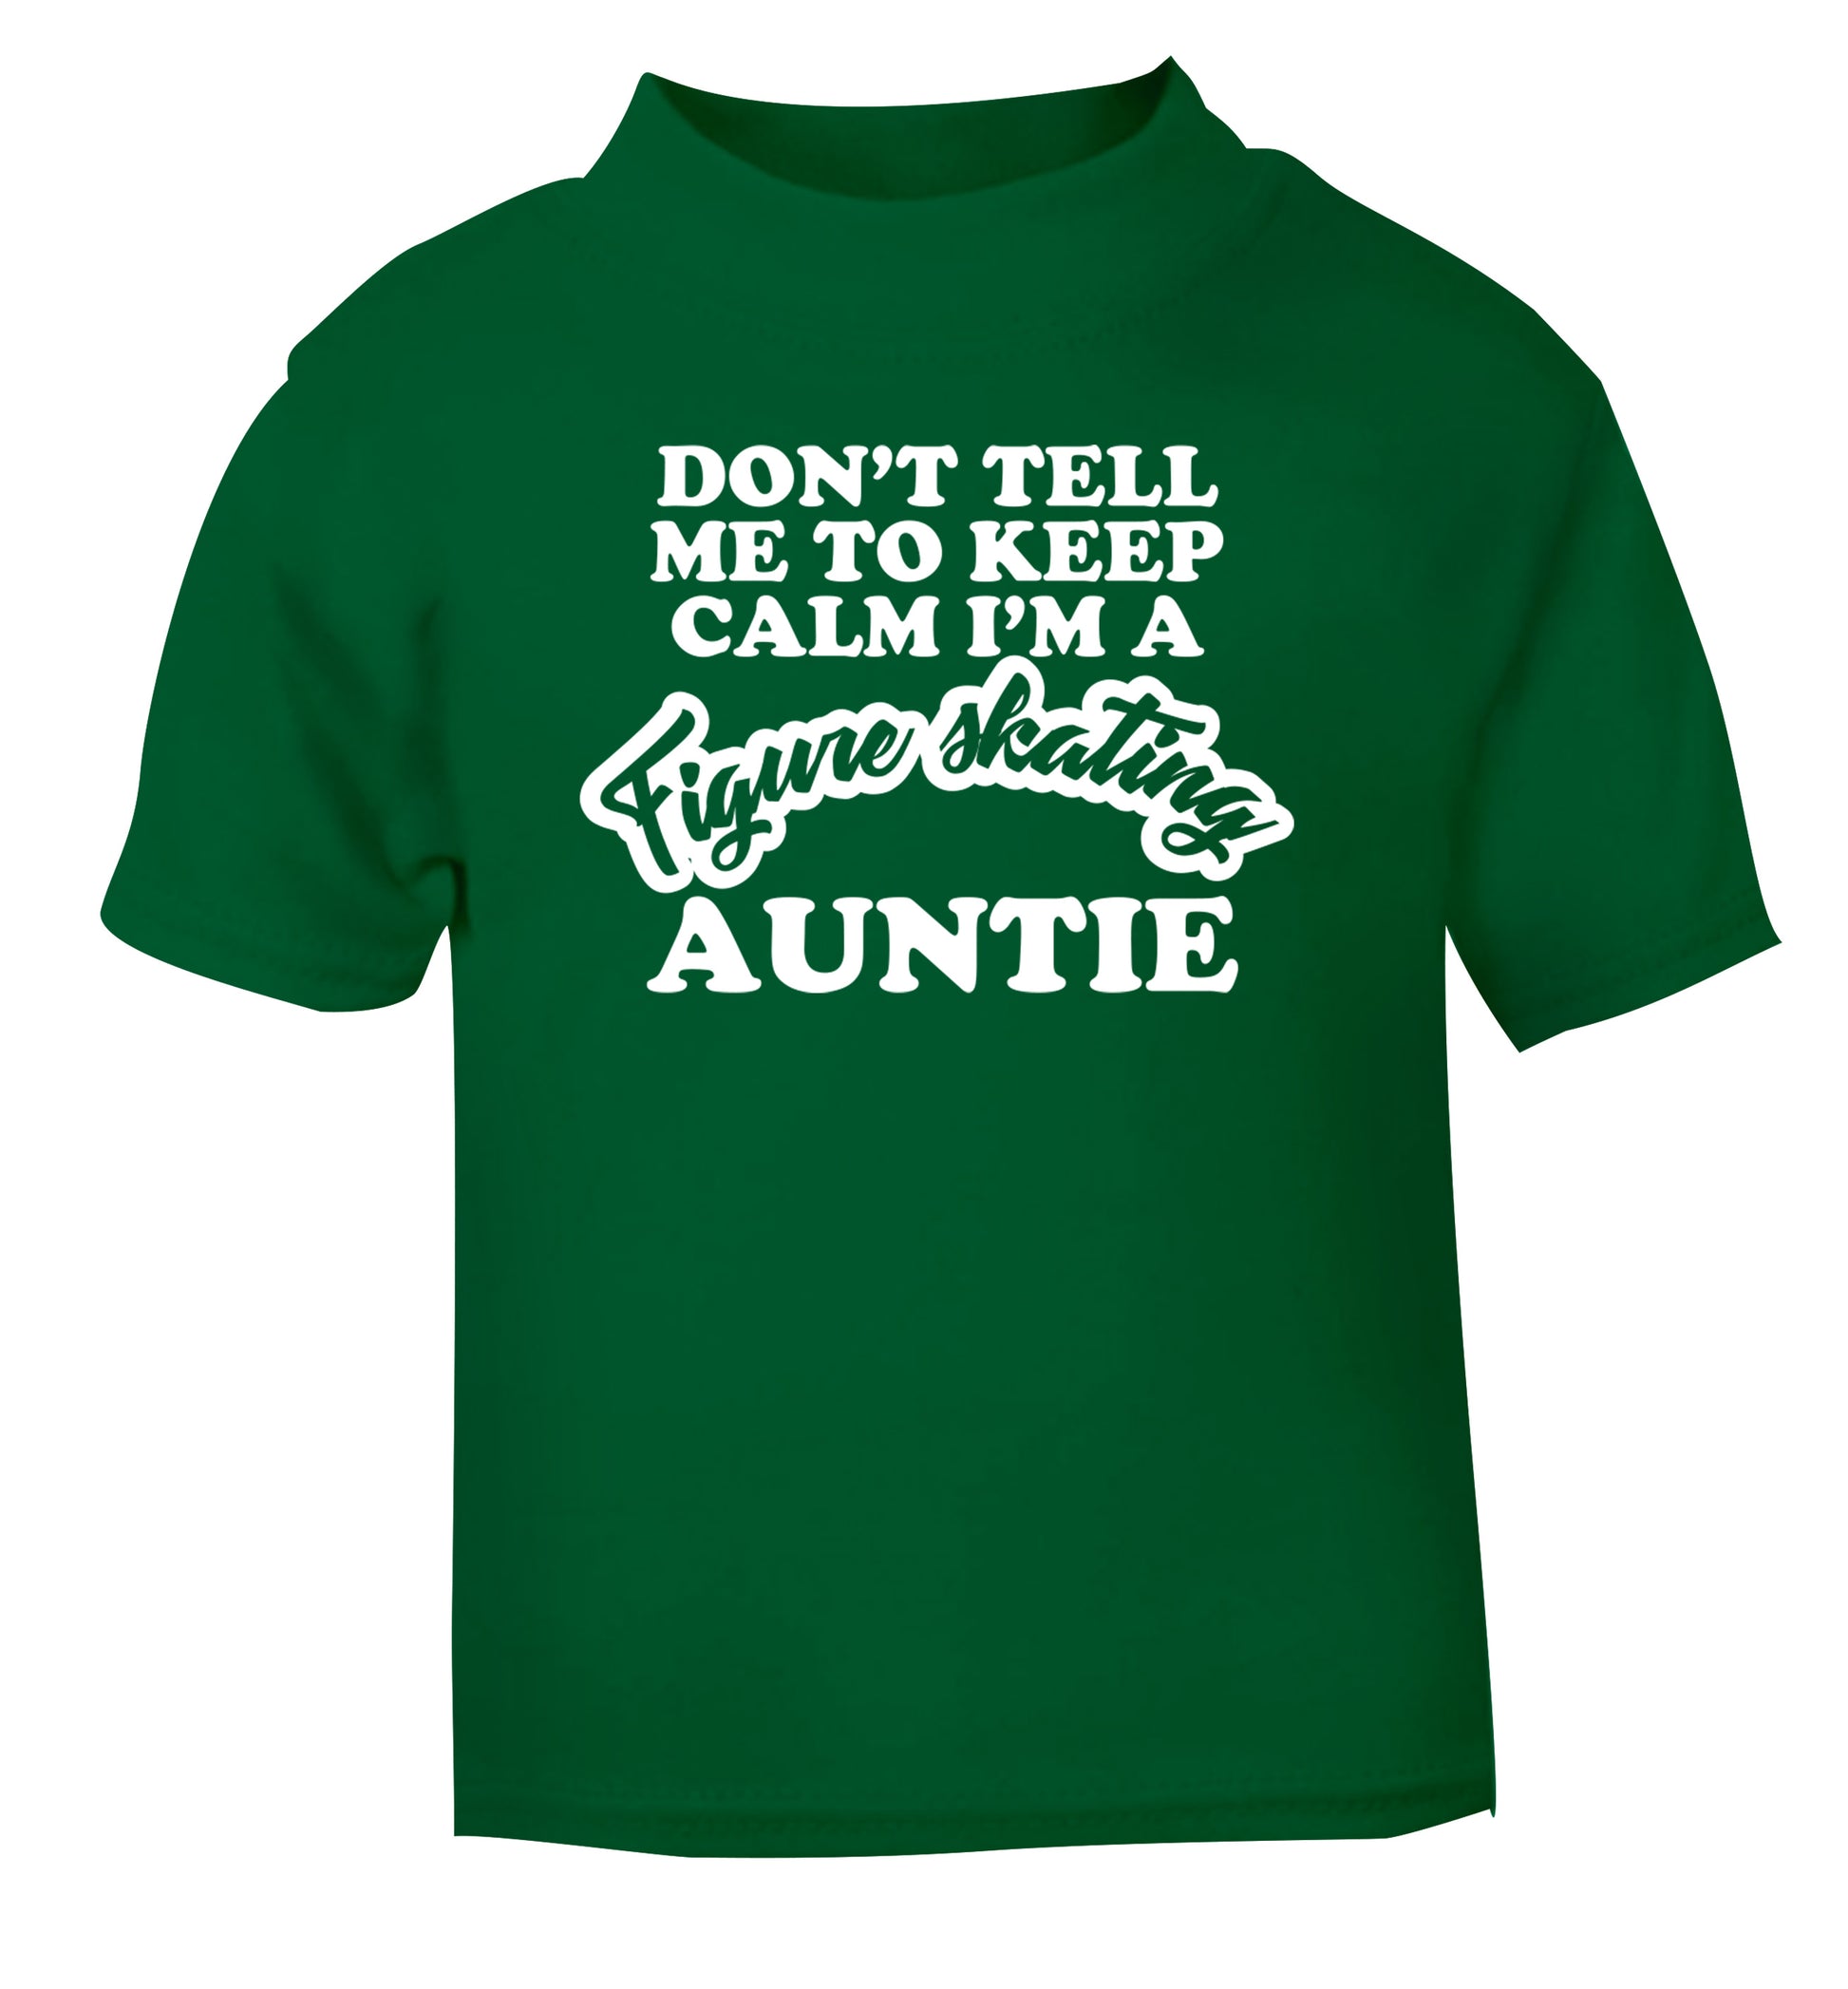 Don't tell me to keep calm I'm a figure skating auntie green Baby Toddler Tshirt 2 Years